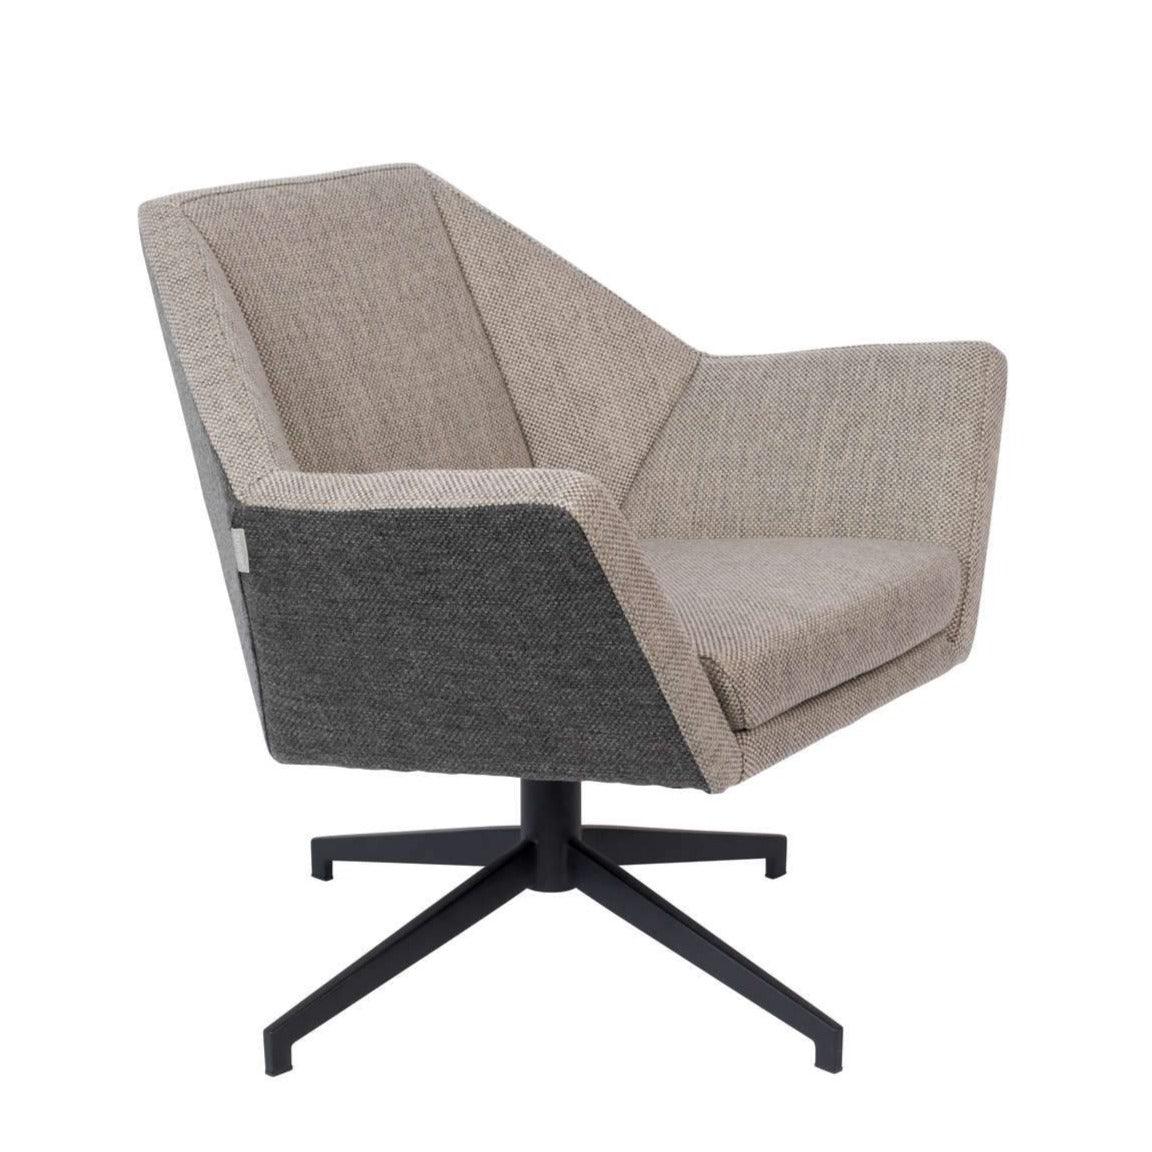 The unusual angular armchair with the charming name Uncle Jesse, will put every guest into delight and reflection. Its shape is a perfect contrast with its softness and convenience, which is an ideal place for evening rest.